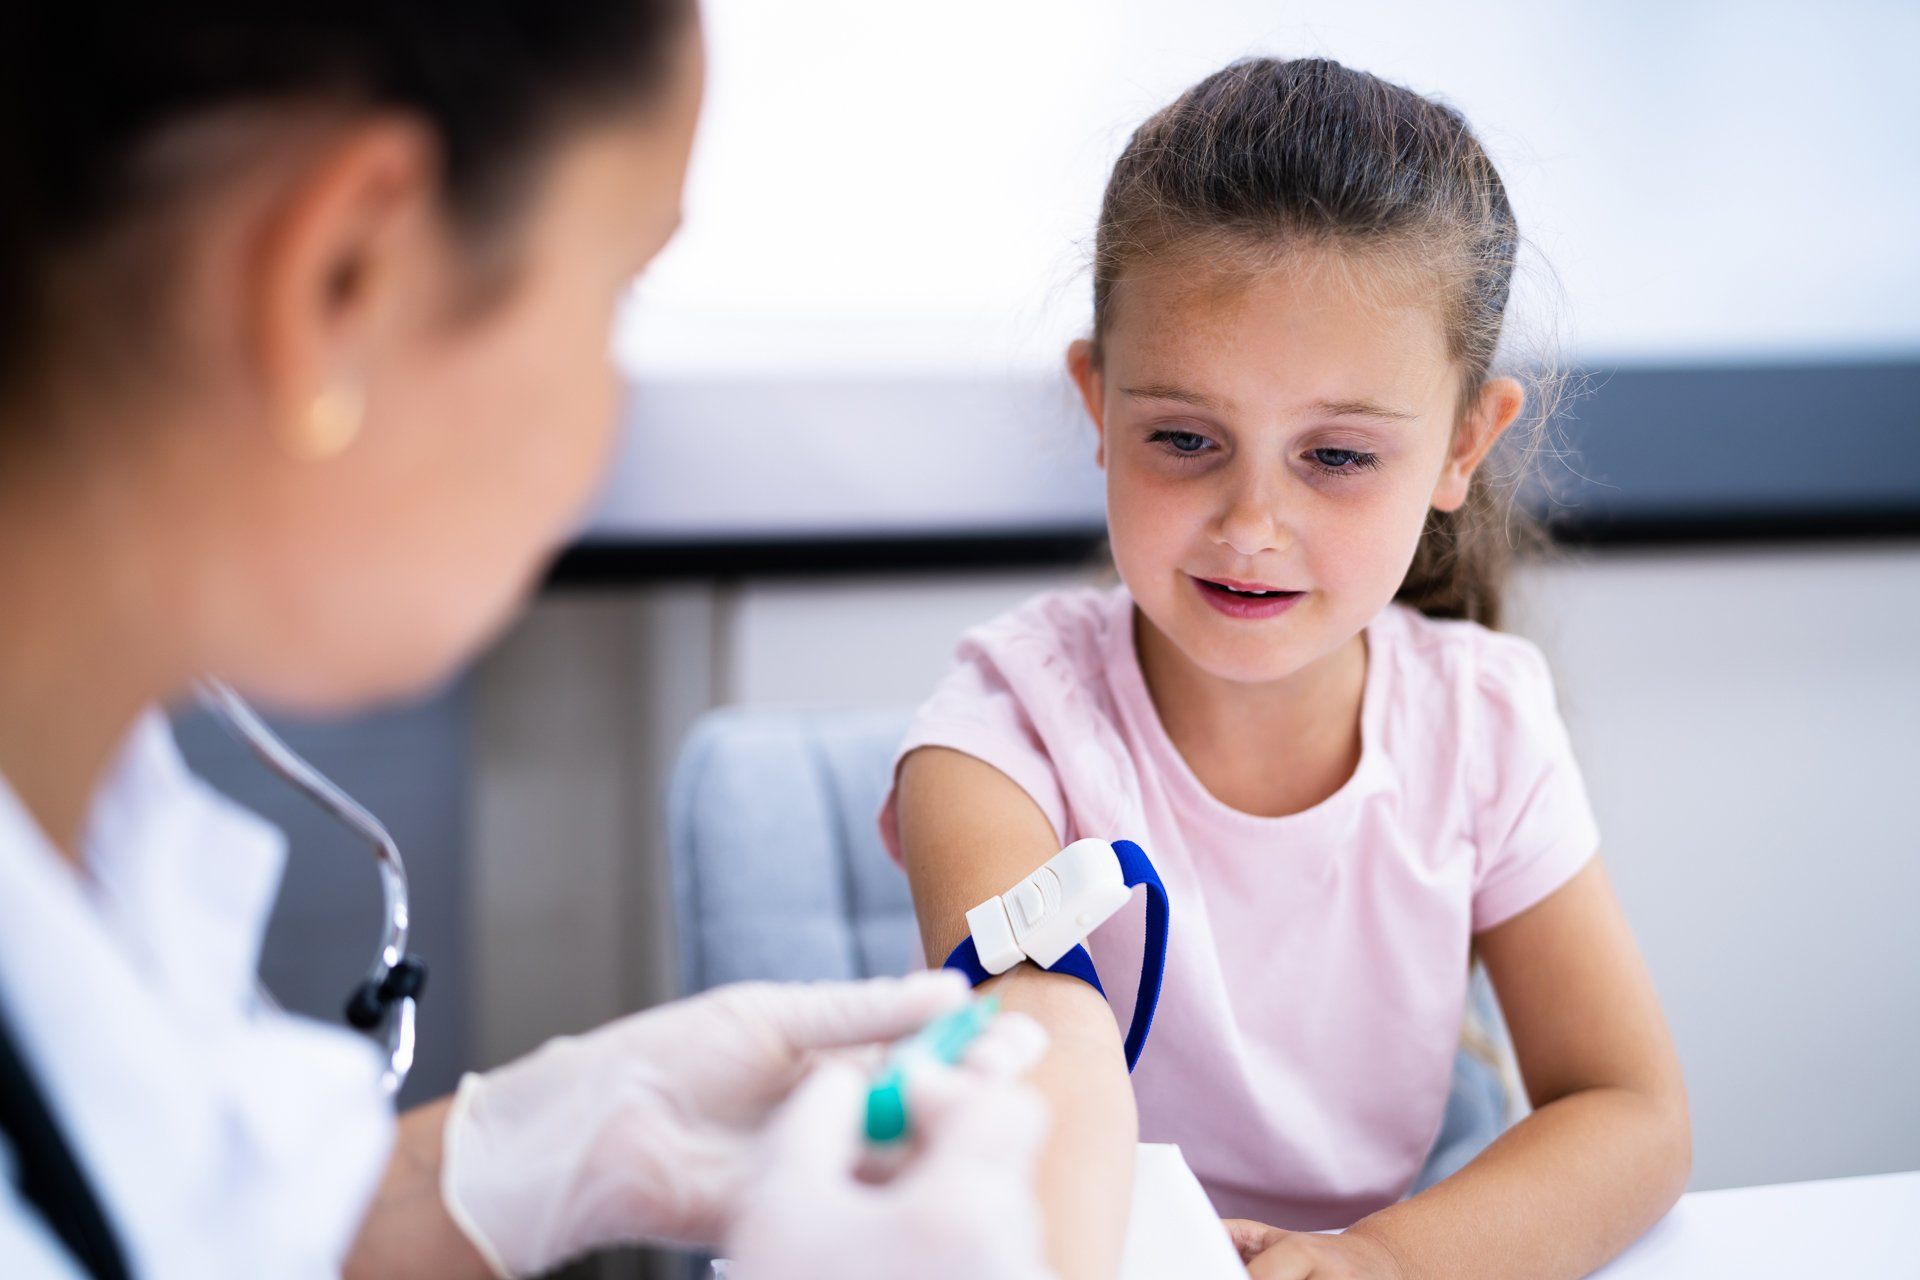 Healthcare provider utilizing TapLabs mobile blood collection services to help child patient